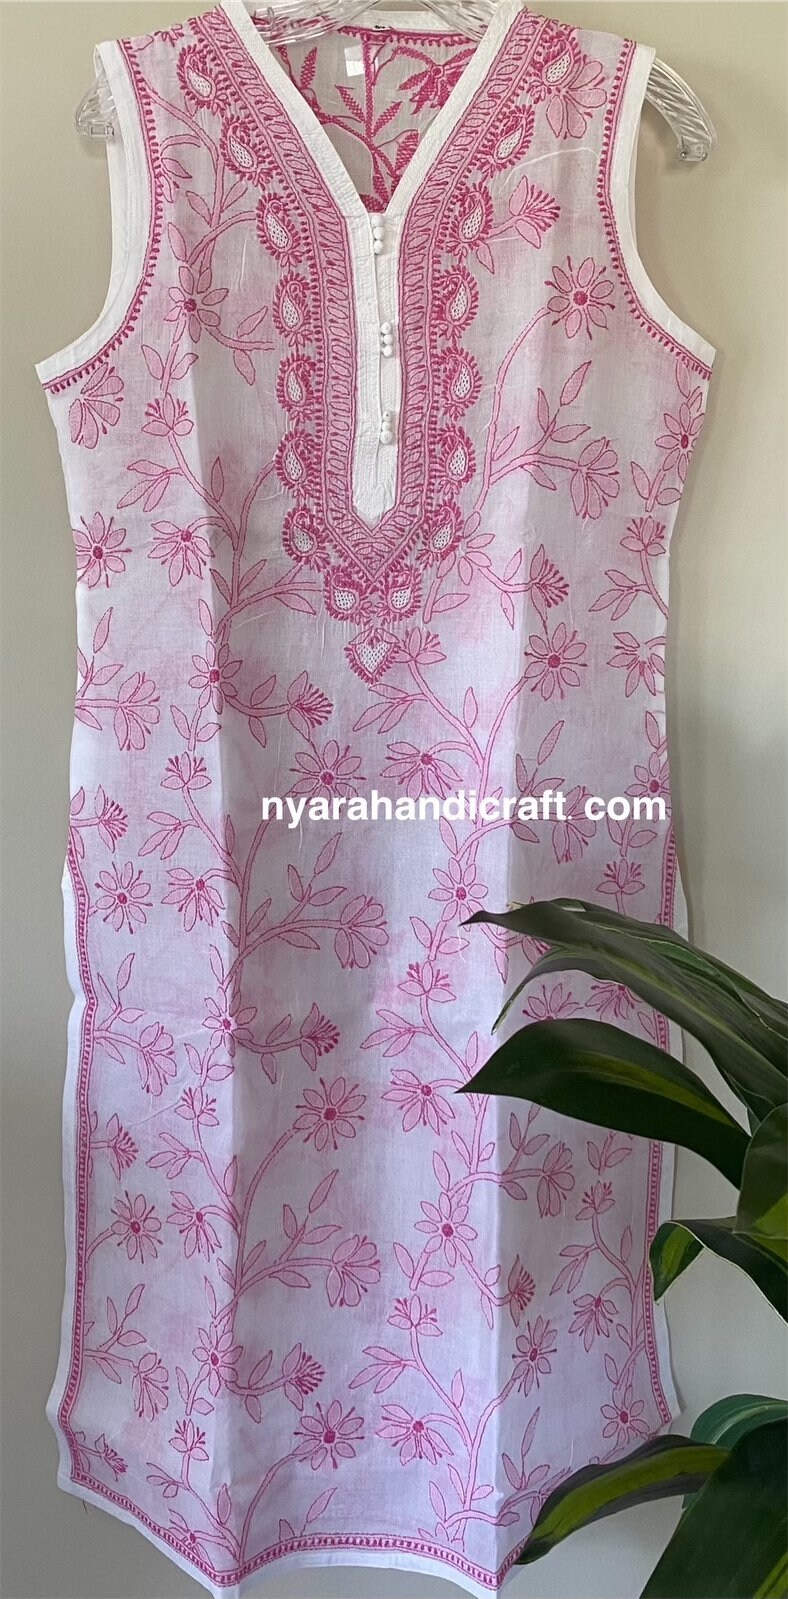 White dress for women with embroidery in double ikkat fabric.